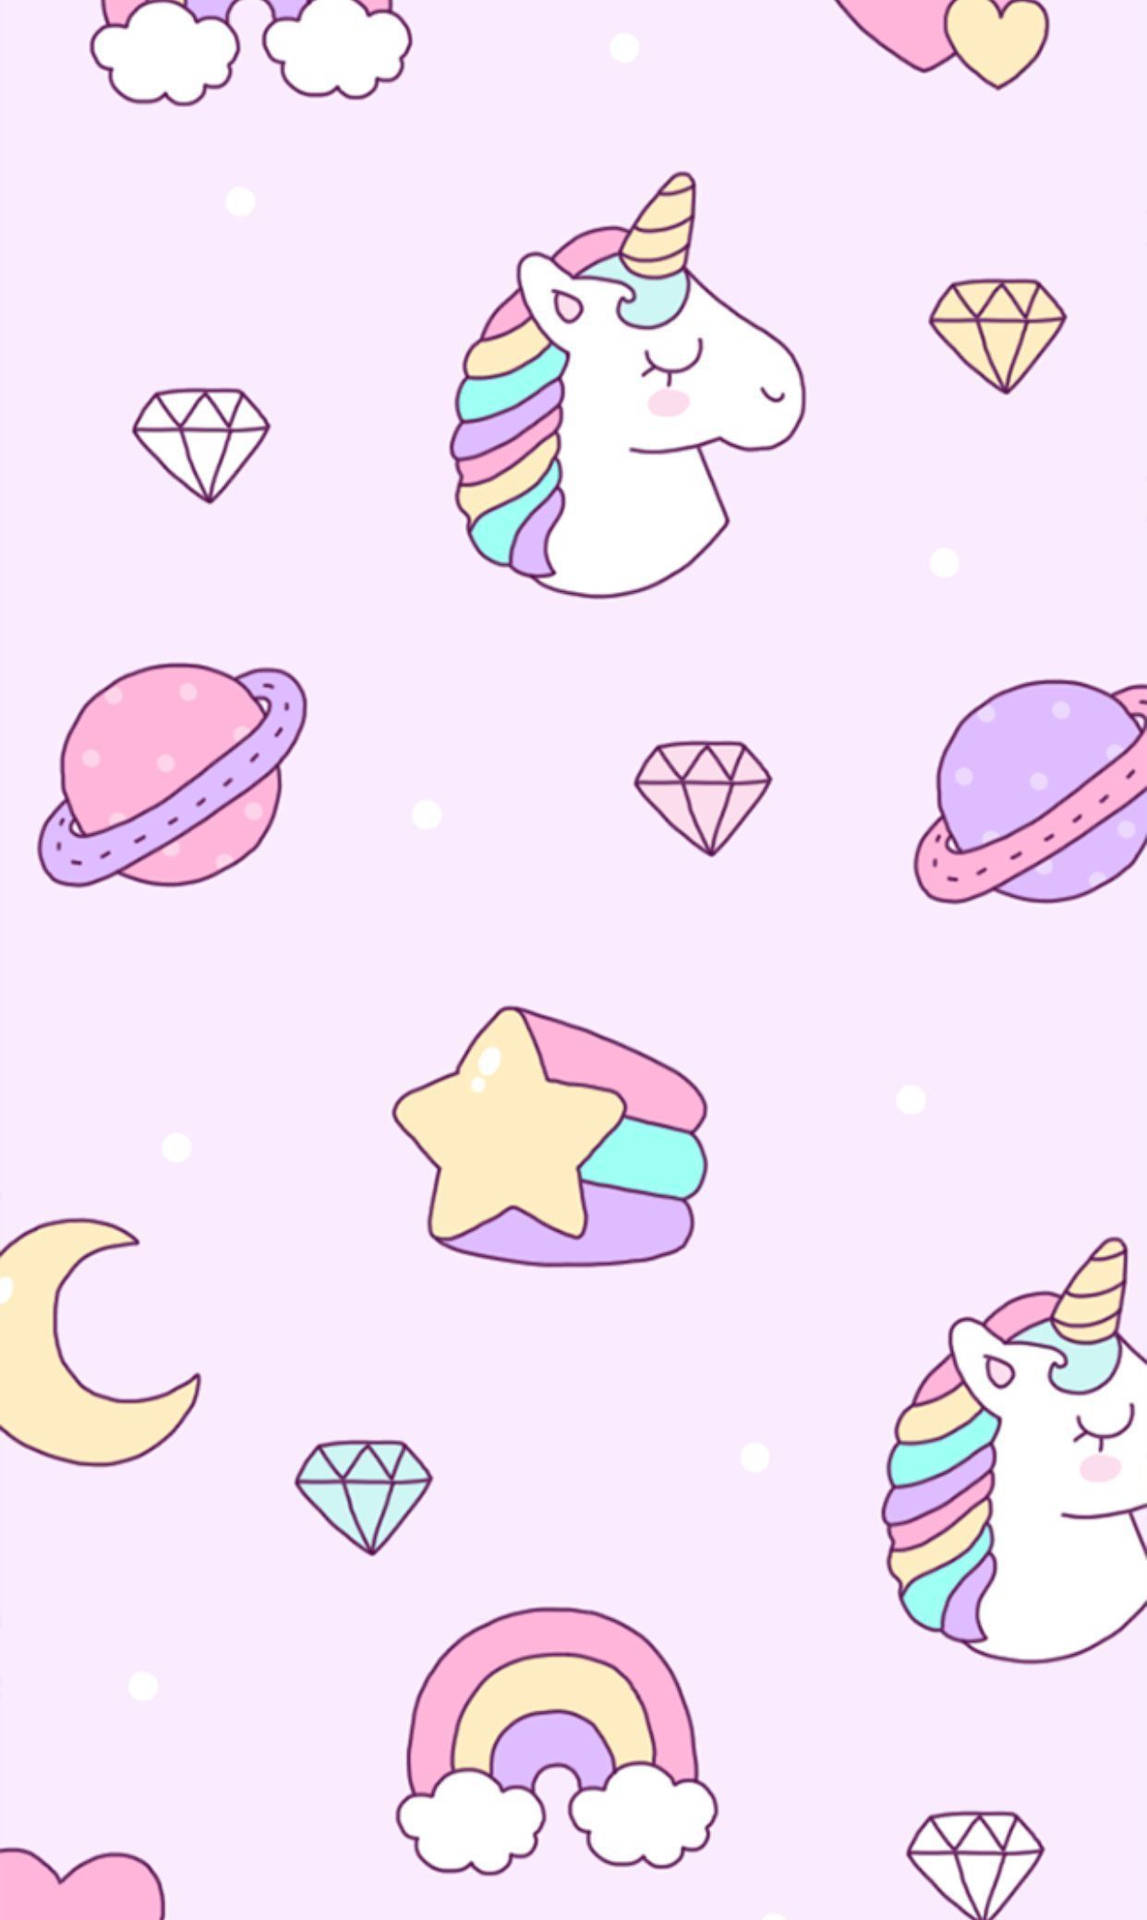 Top 999+ Cute Tablet Wallpaper Full HD, 4K Free to Use